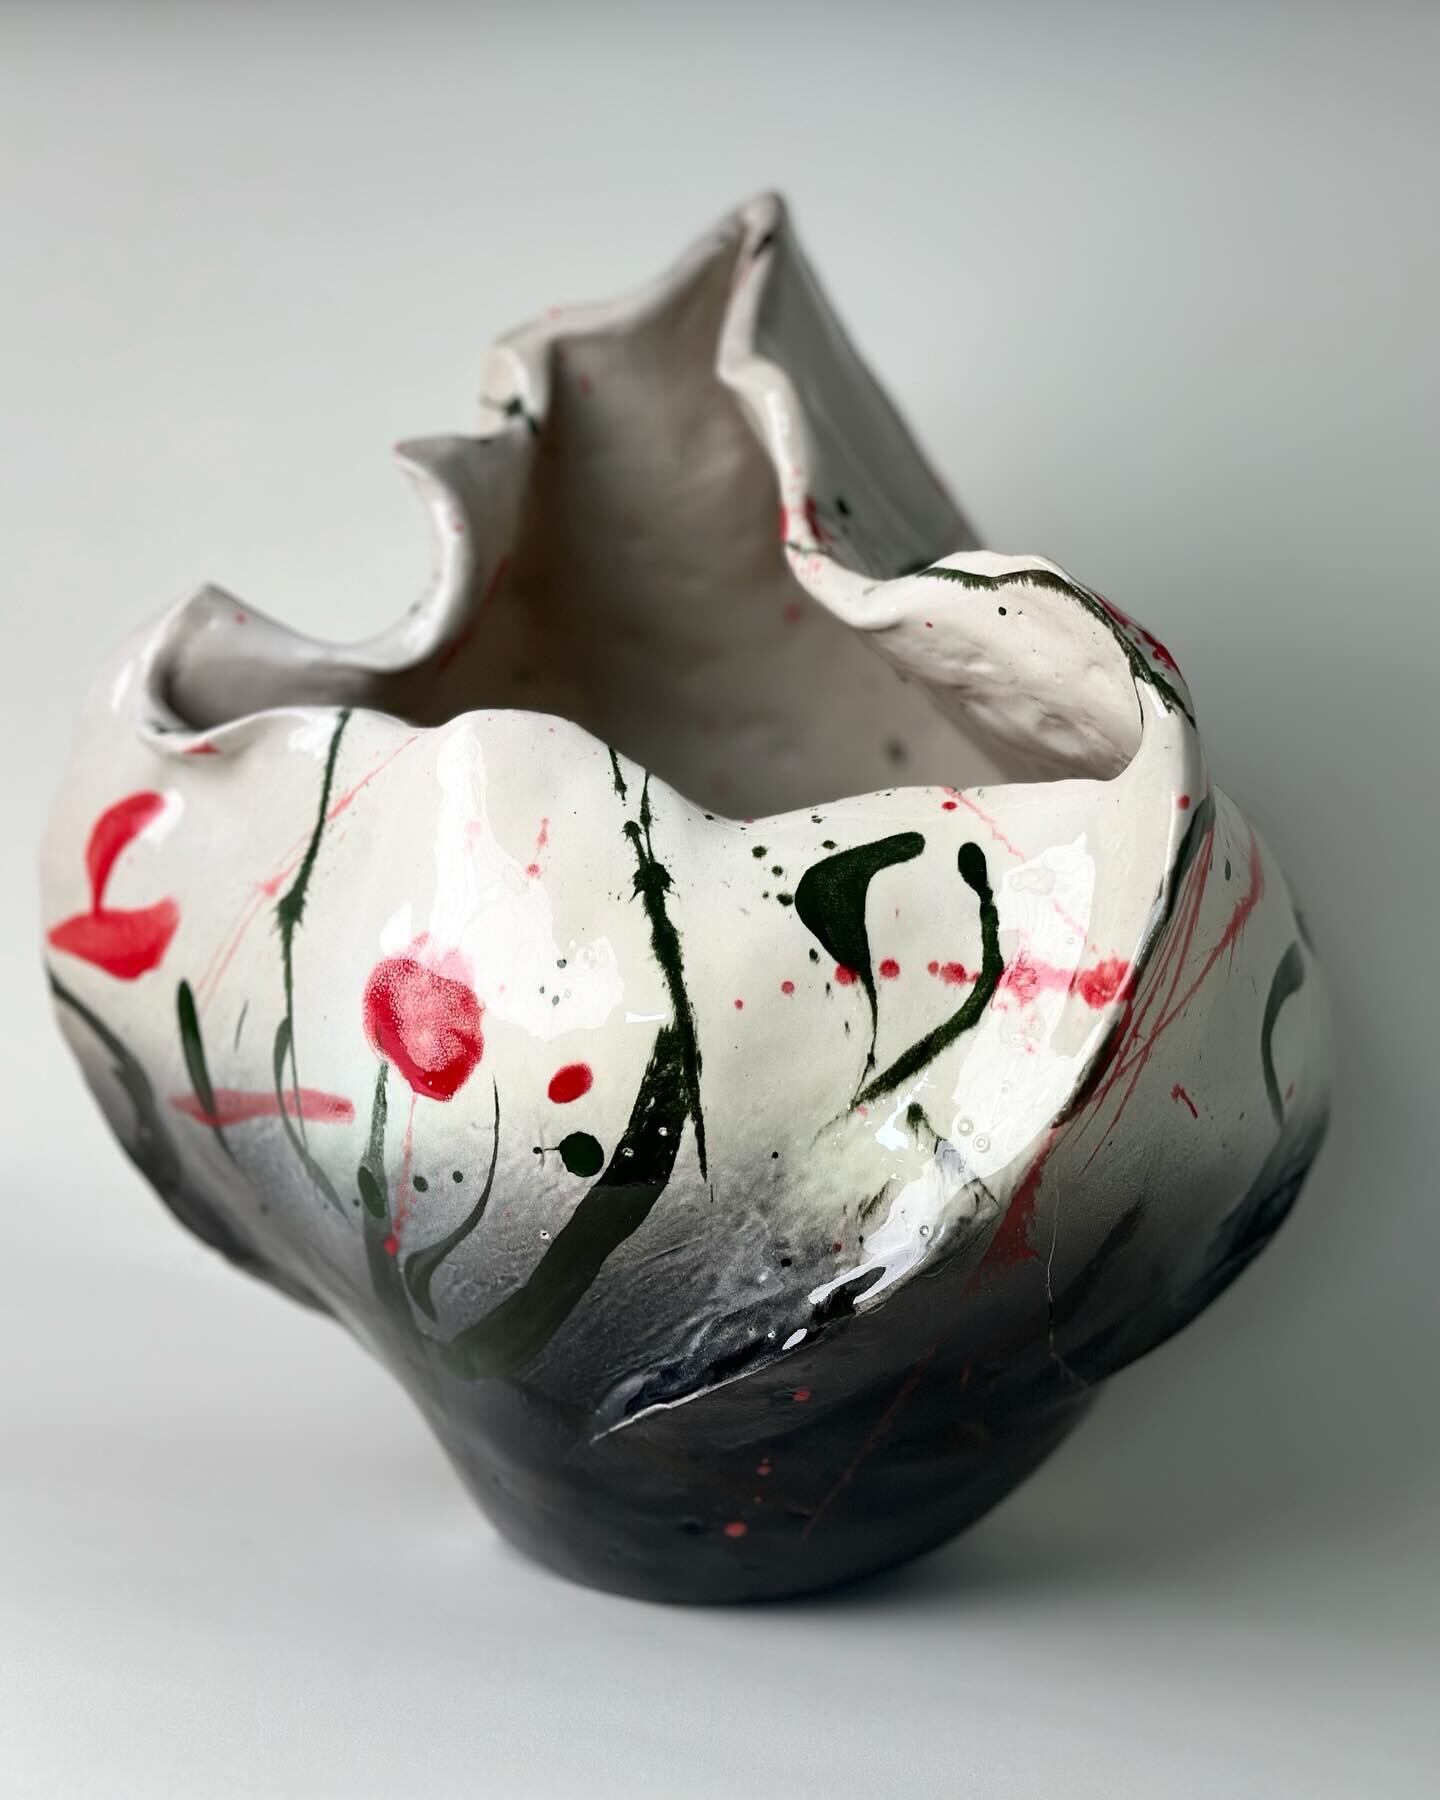 &quot;Oriental Harmony&rdquo; - Red &amp; Green Serenity with Ombre Effect Ceramic Vase.

Donating 50% of sales to Israel's Emergency Fund (link in bio). Message me or comment. 

#collectibledesign #ceramic #art #ceramicart #ceramicartist #blackandwh